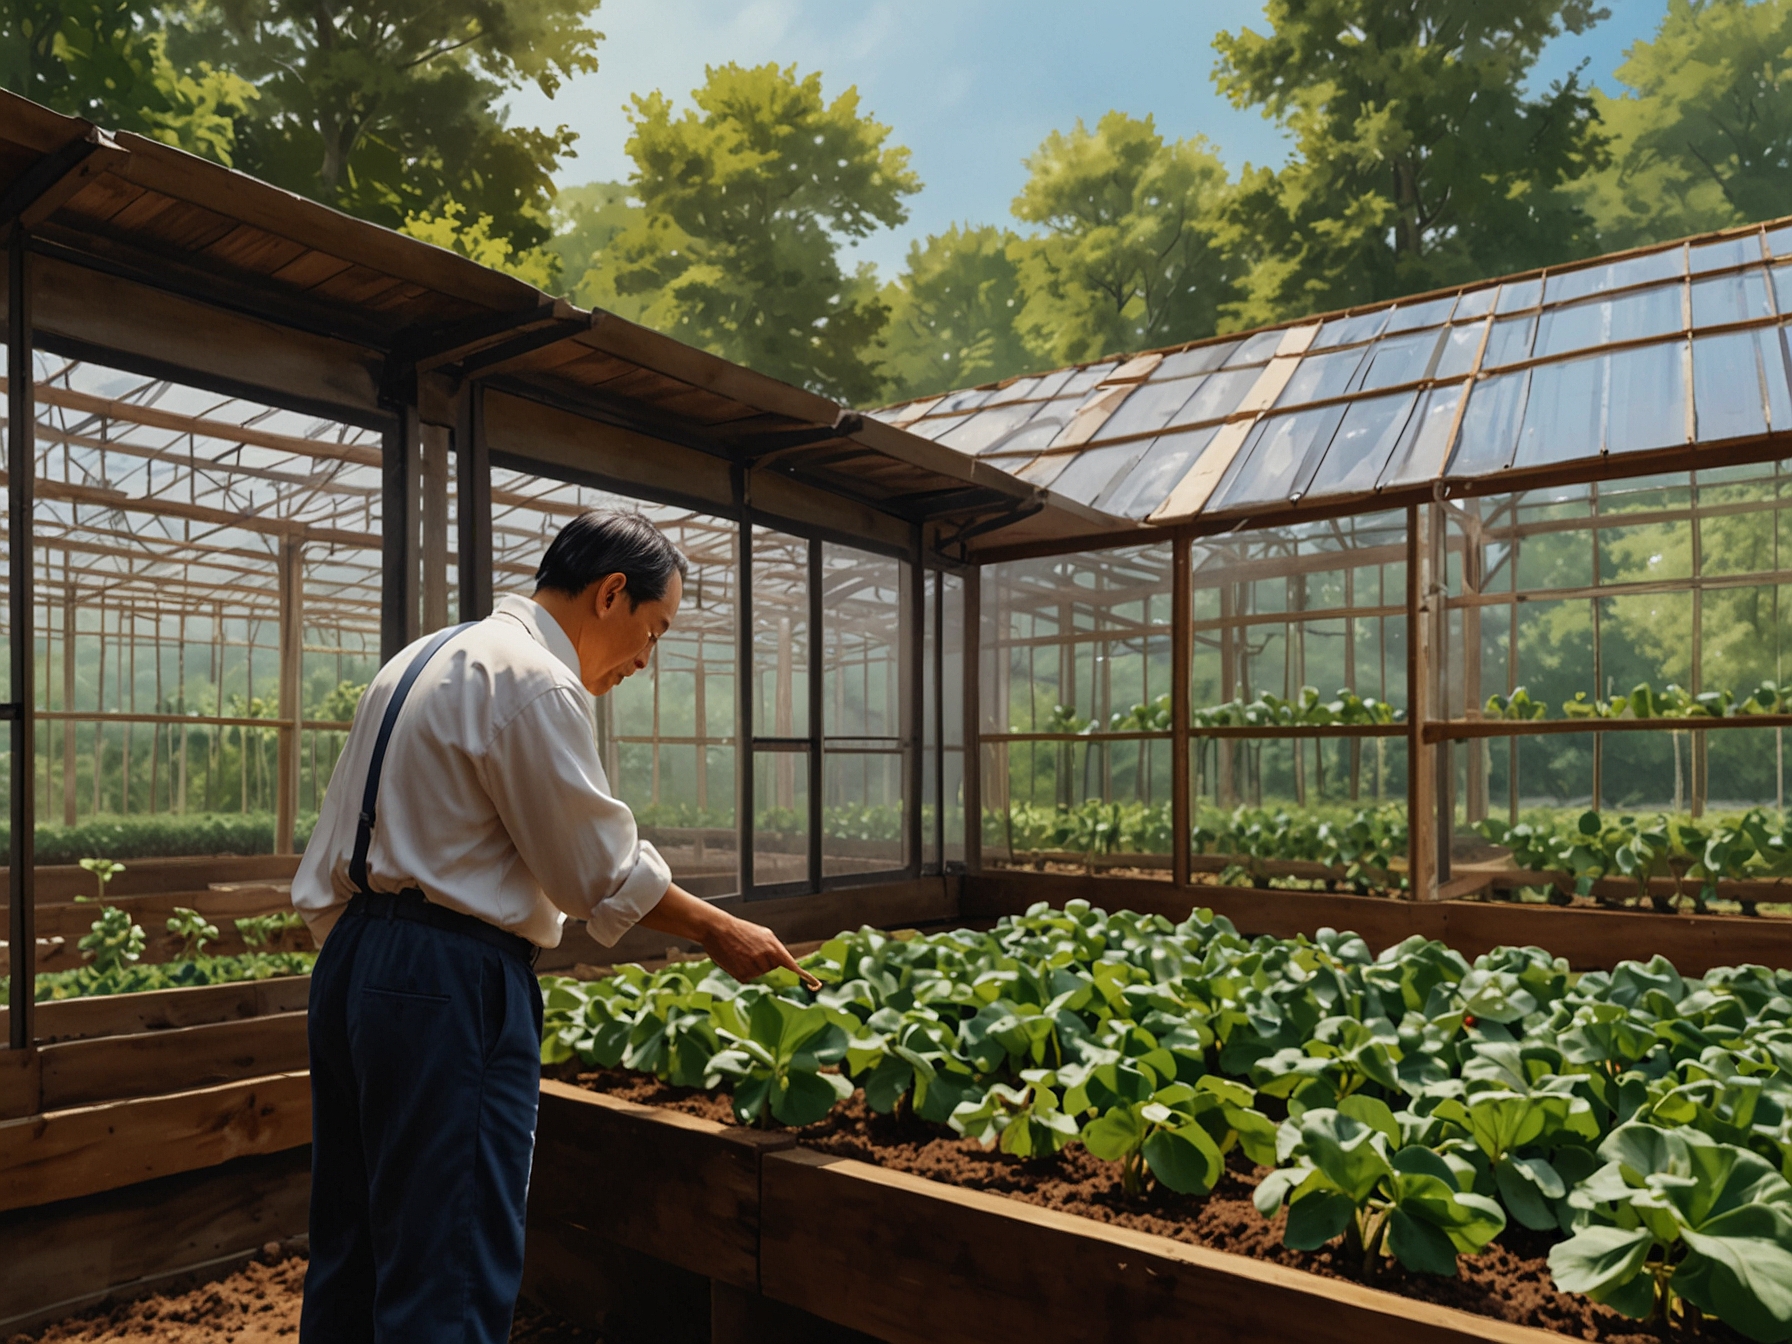 Toshihide Takase meticulously inspecting his Burgundy snail farm in Japan, showcasing the custom-built structures designed to regulate temperature and humidity for optimal snail growth.